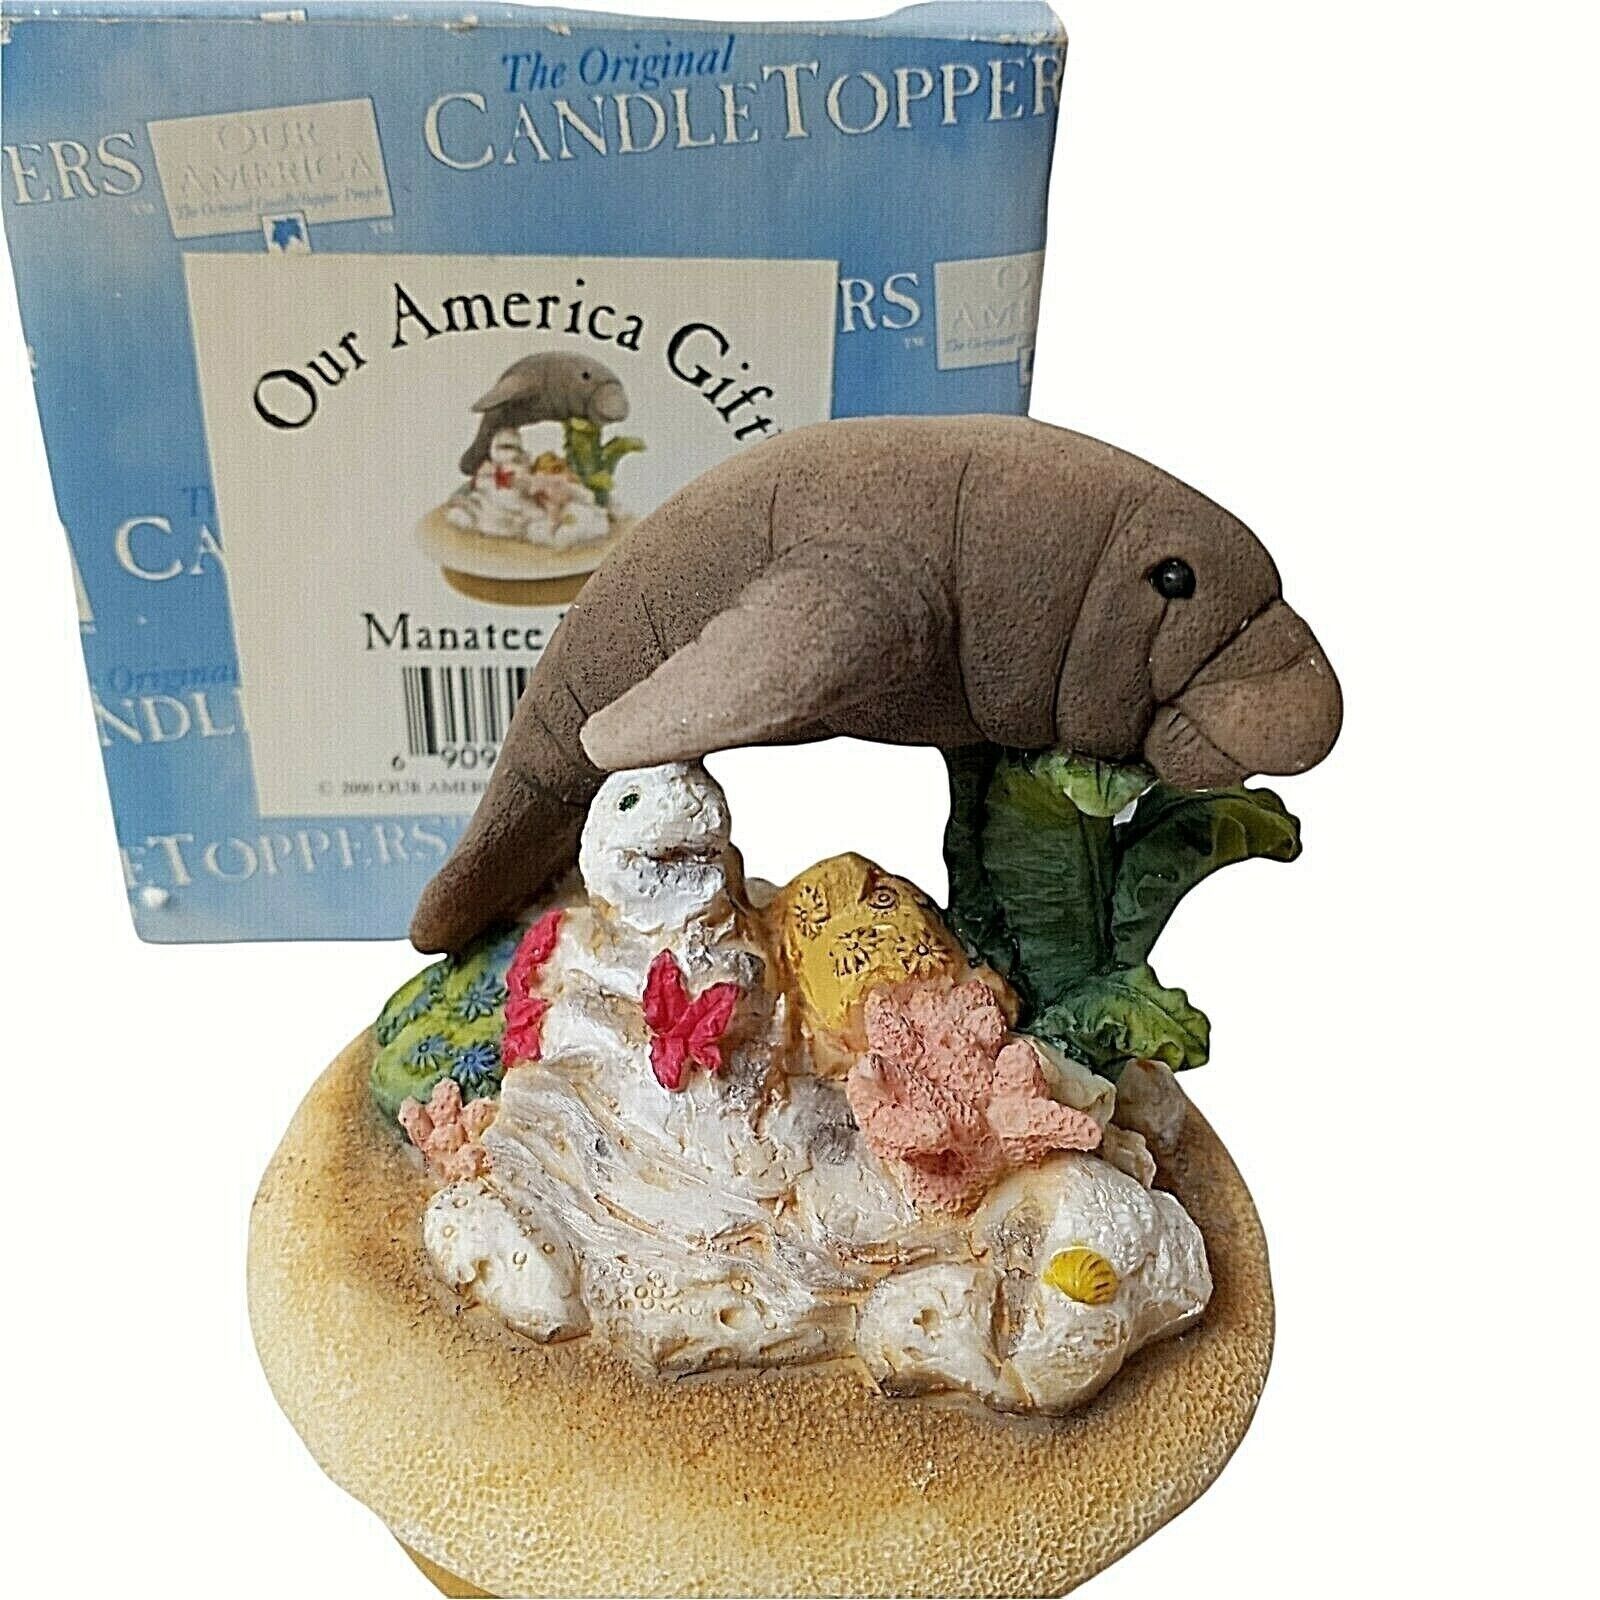 Vintage Manatee Candle Topper Jar Our America for 3" Opening 2000 Ocean Animal - $12.46